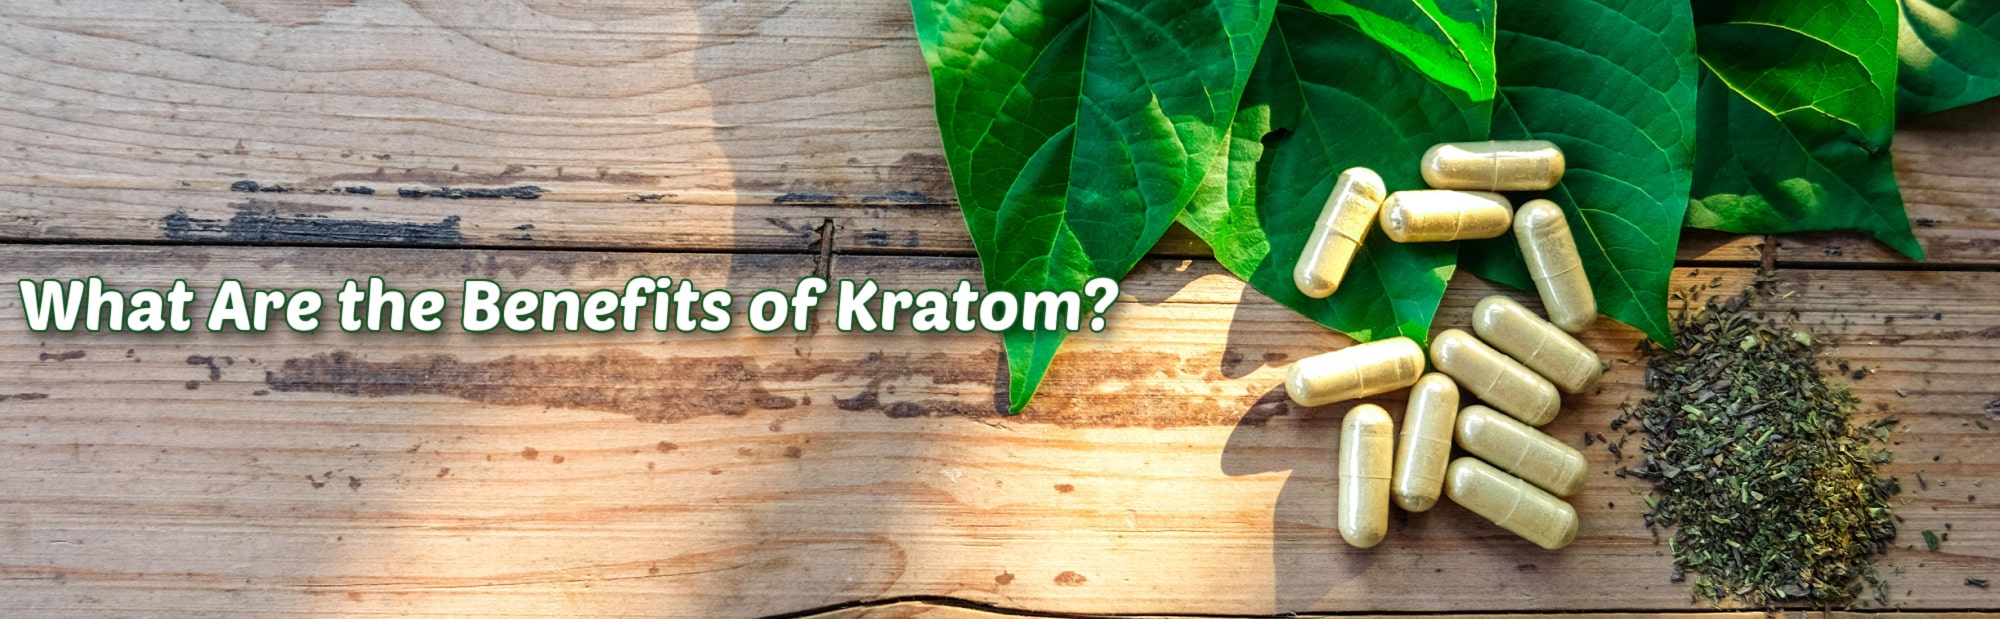 image of what are the benefits of kratom